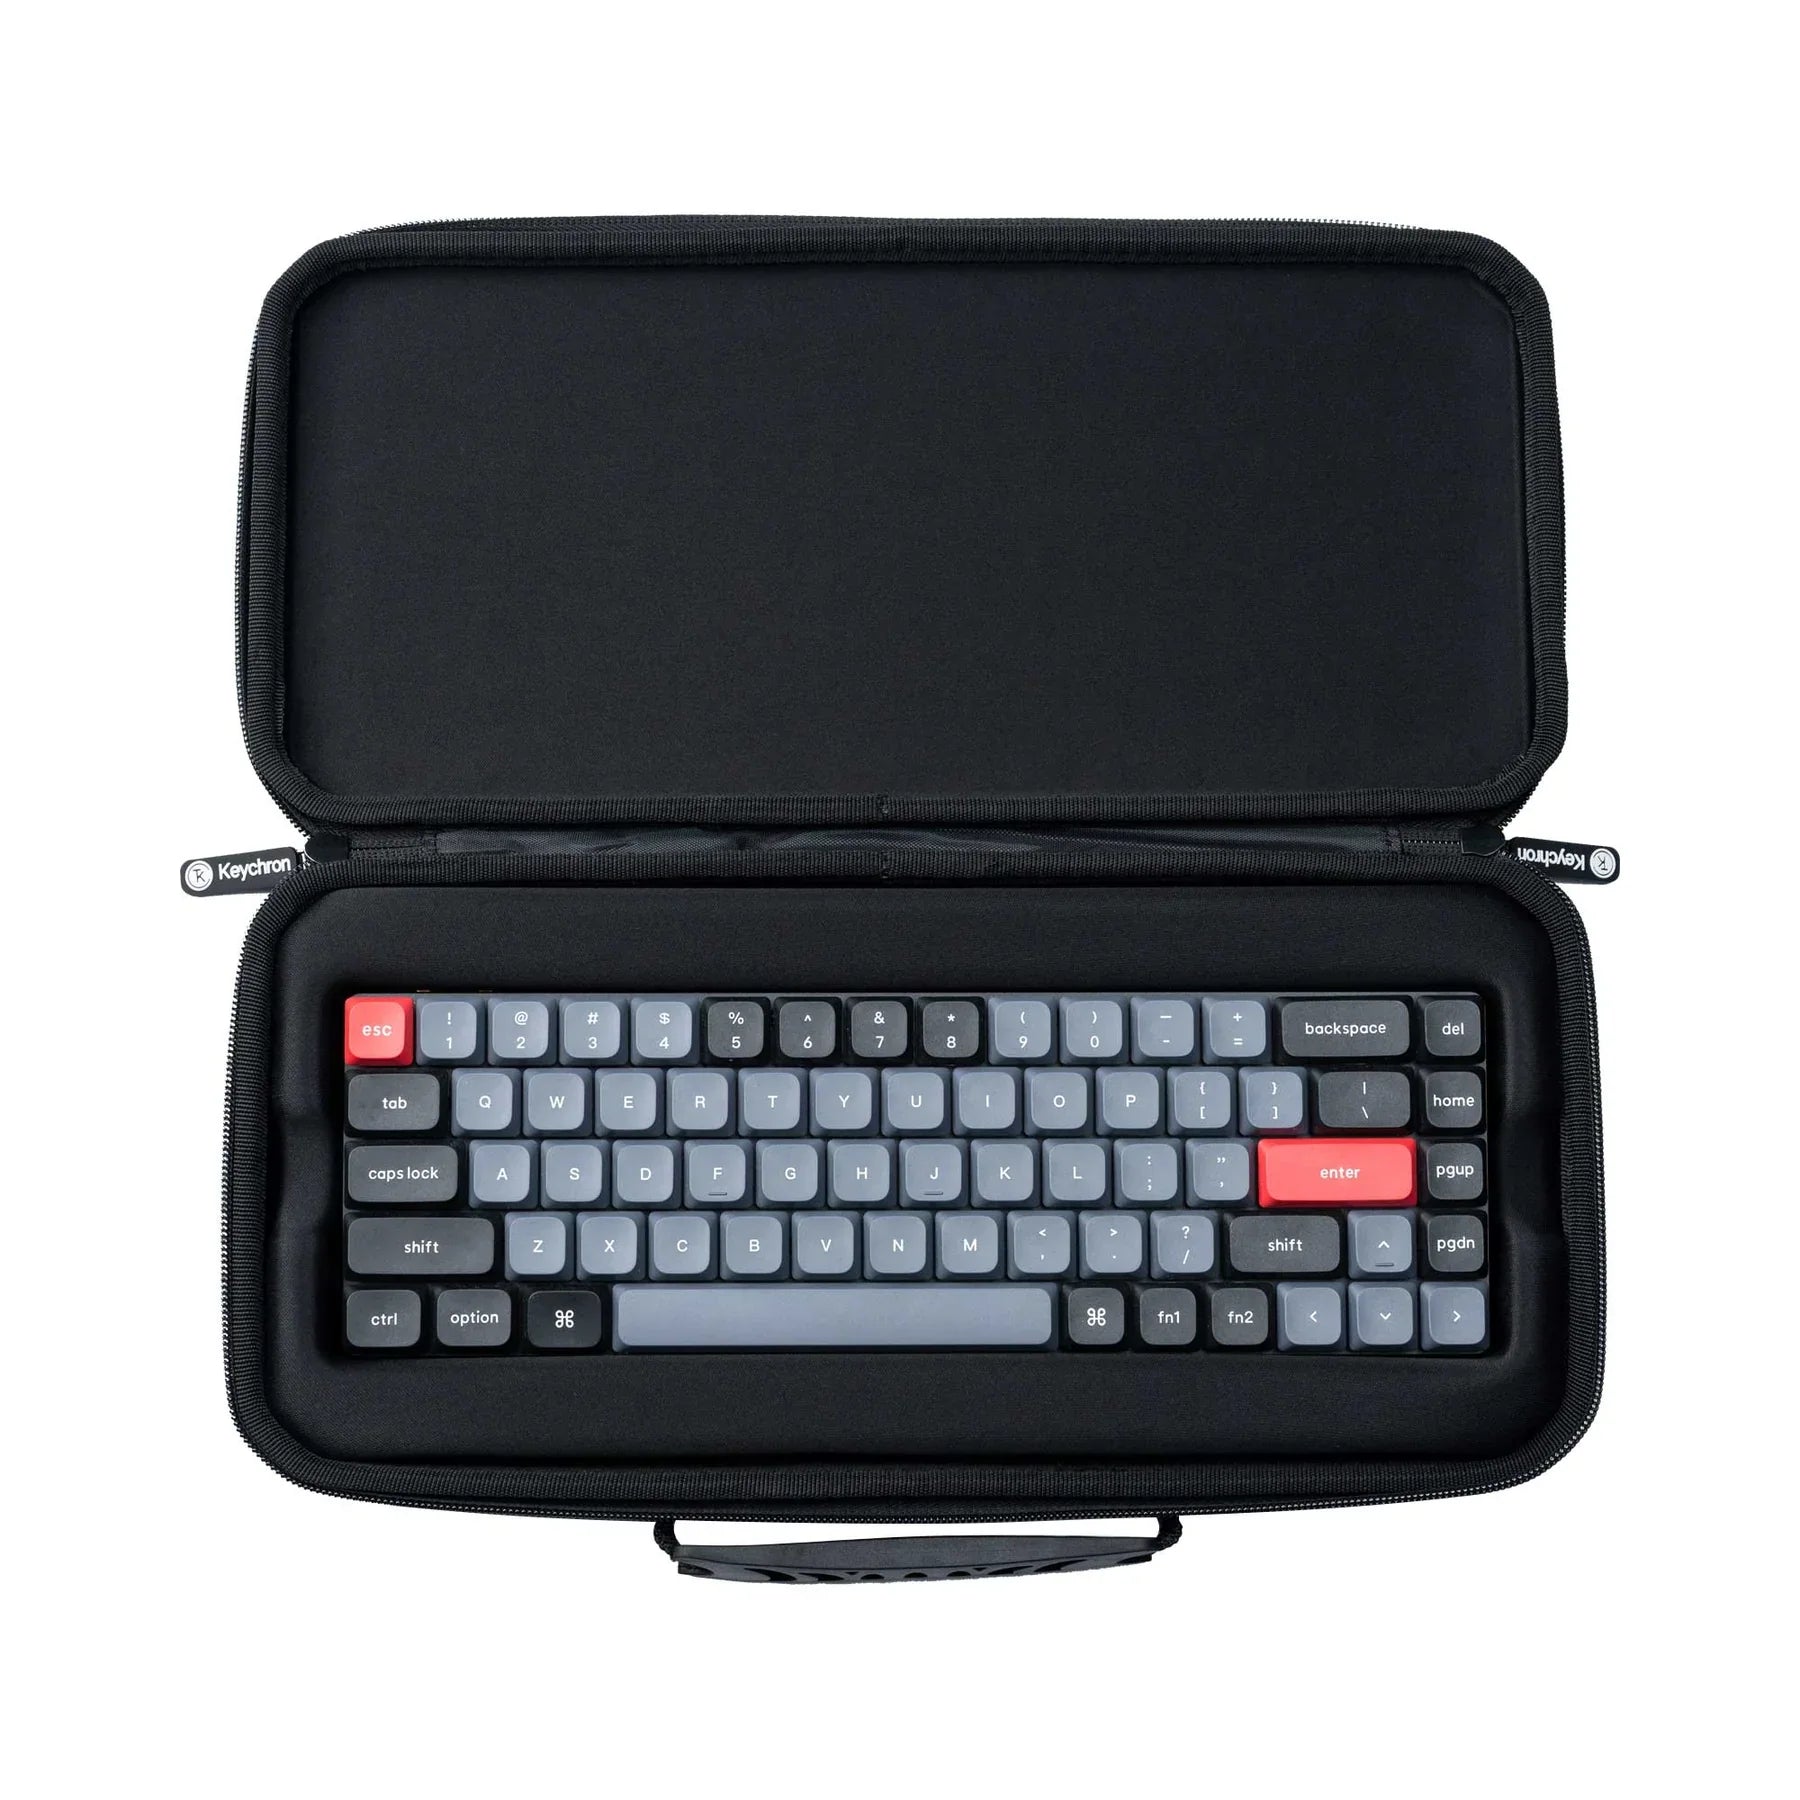 keychron-carrying-case-for-k7-k7-pro-aluminum-frame-keyboard_1800x1800_3560b5c3-aabd-4e17-9236-d51cabe09ec4__PID:55ce69ff-bf37-449c-8a5a-a7872cd341dc